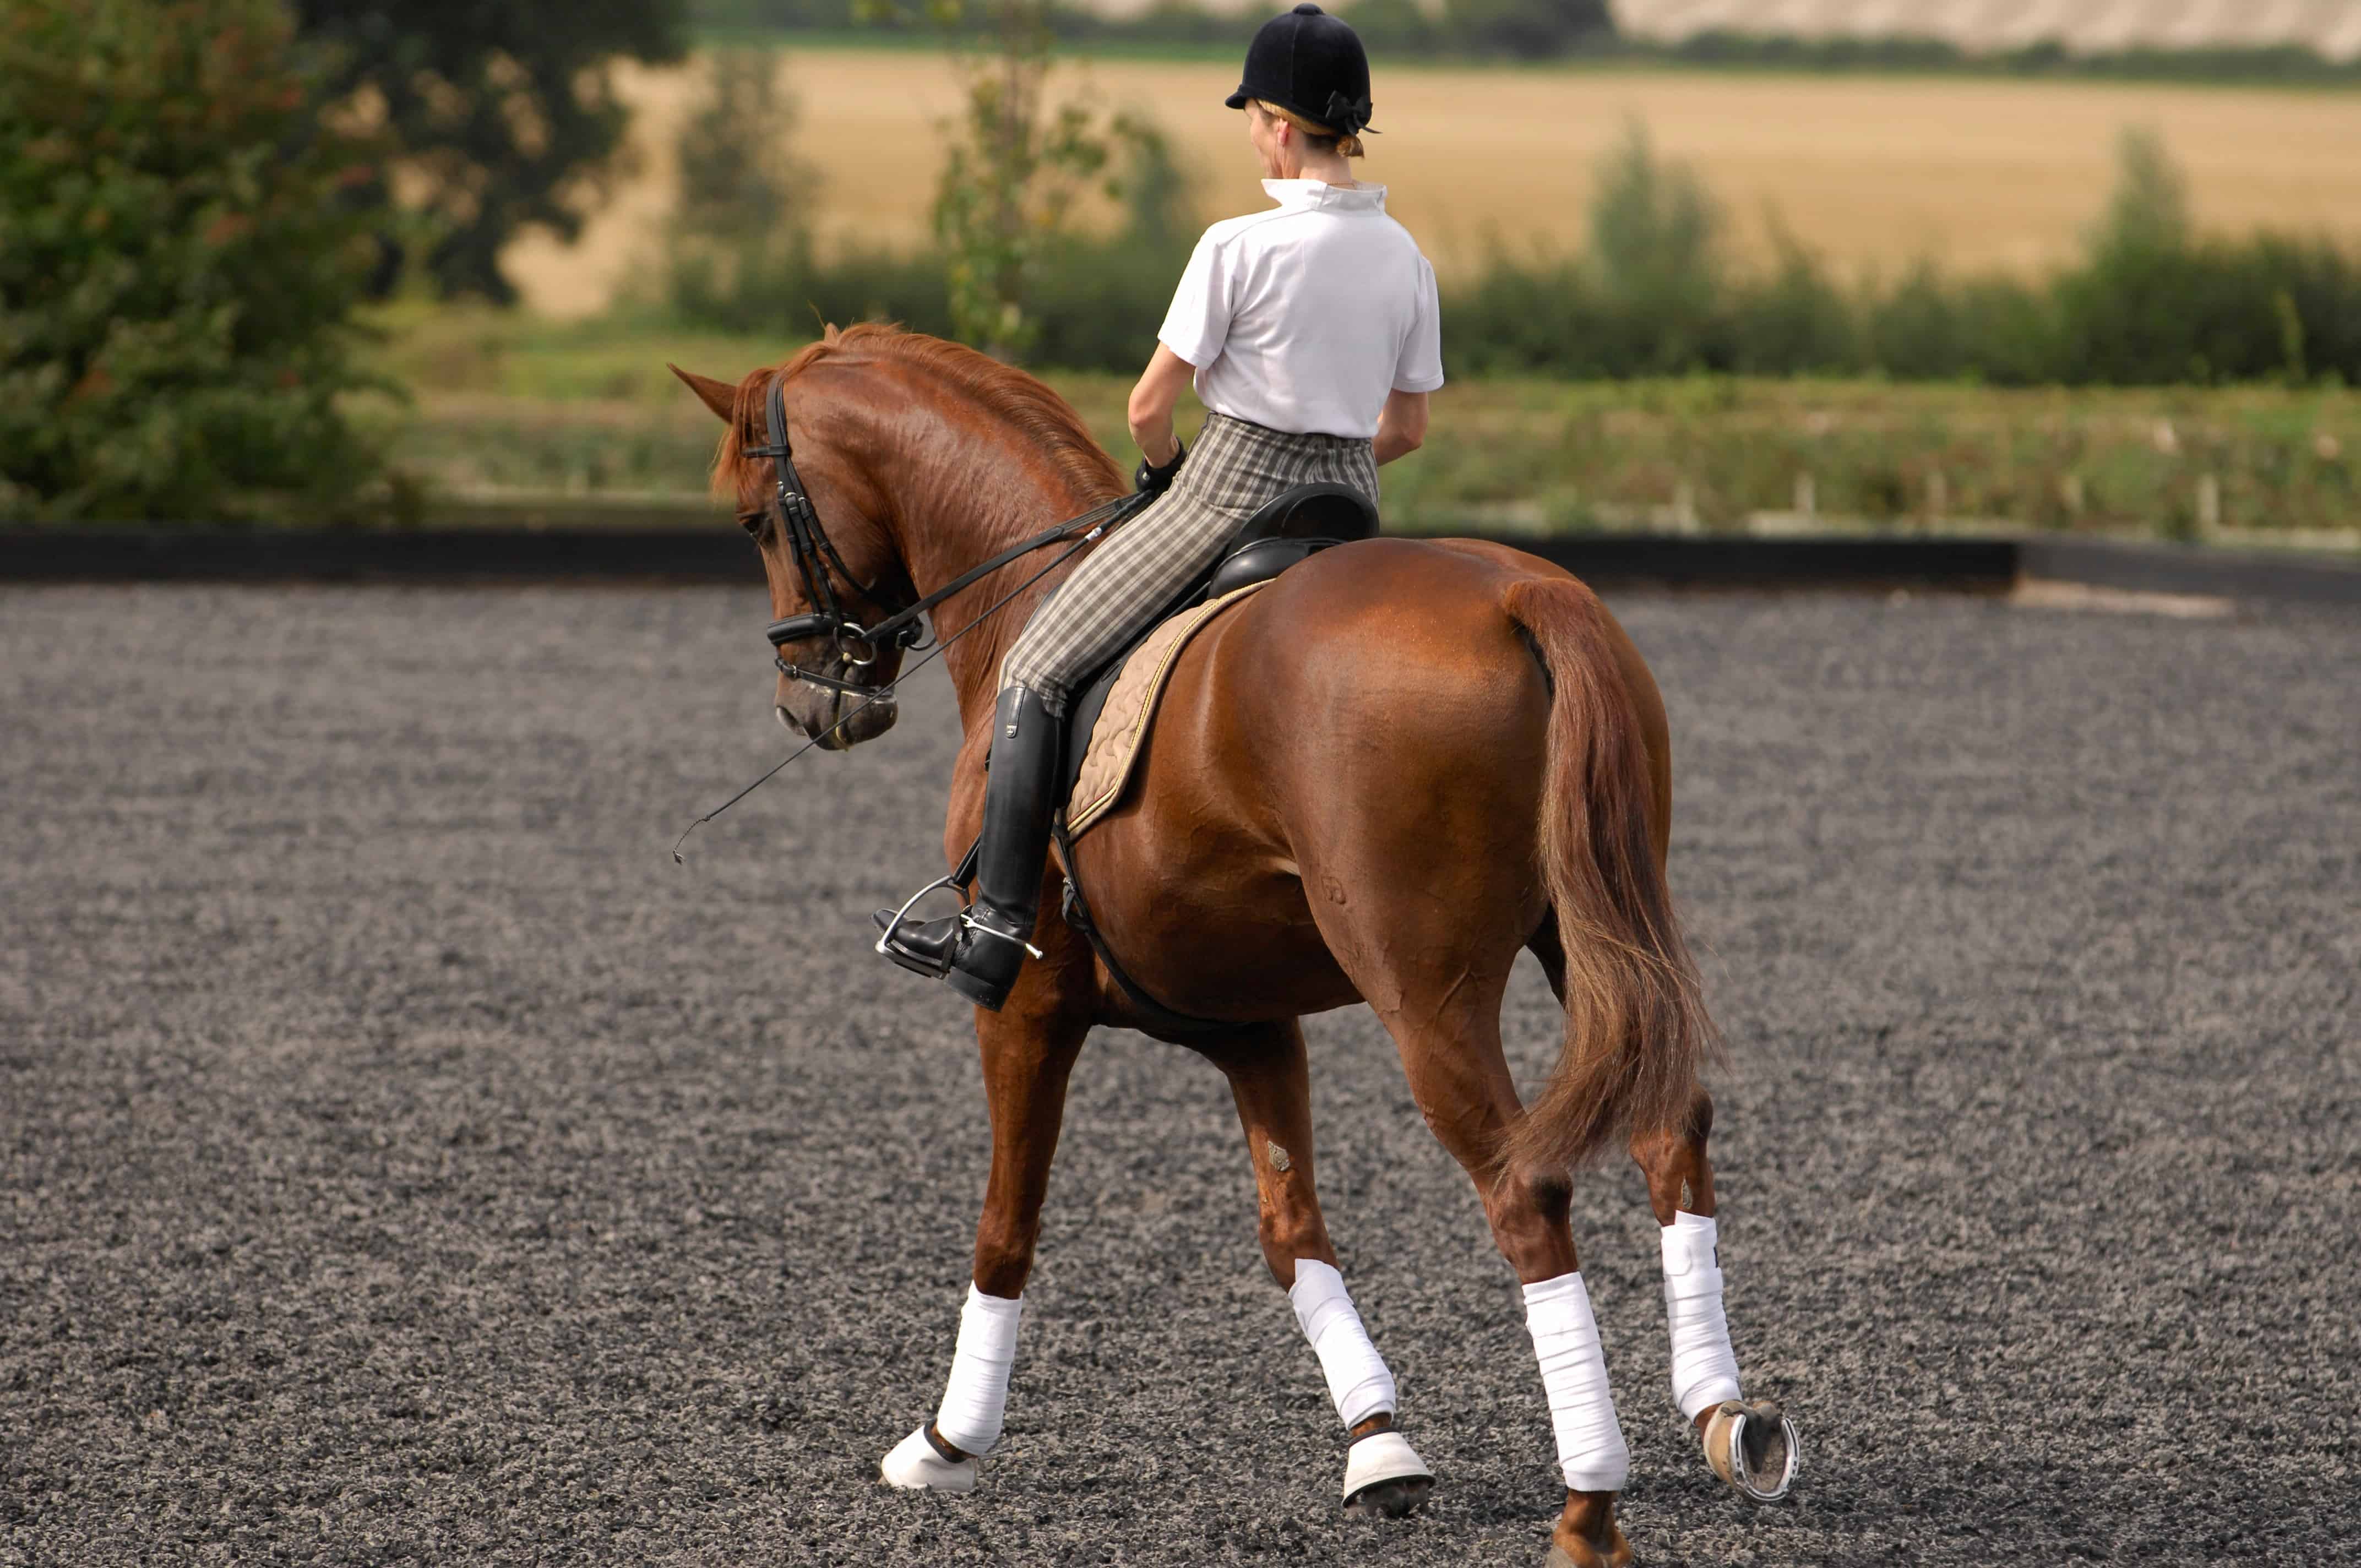 Flawless flatwork: Getting started